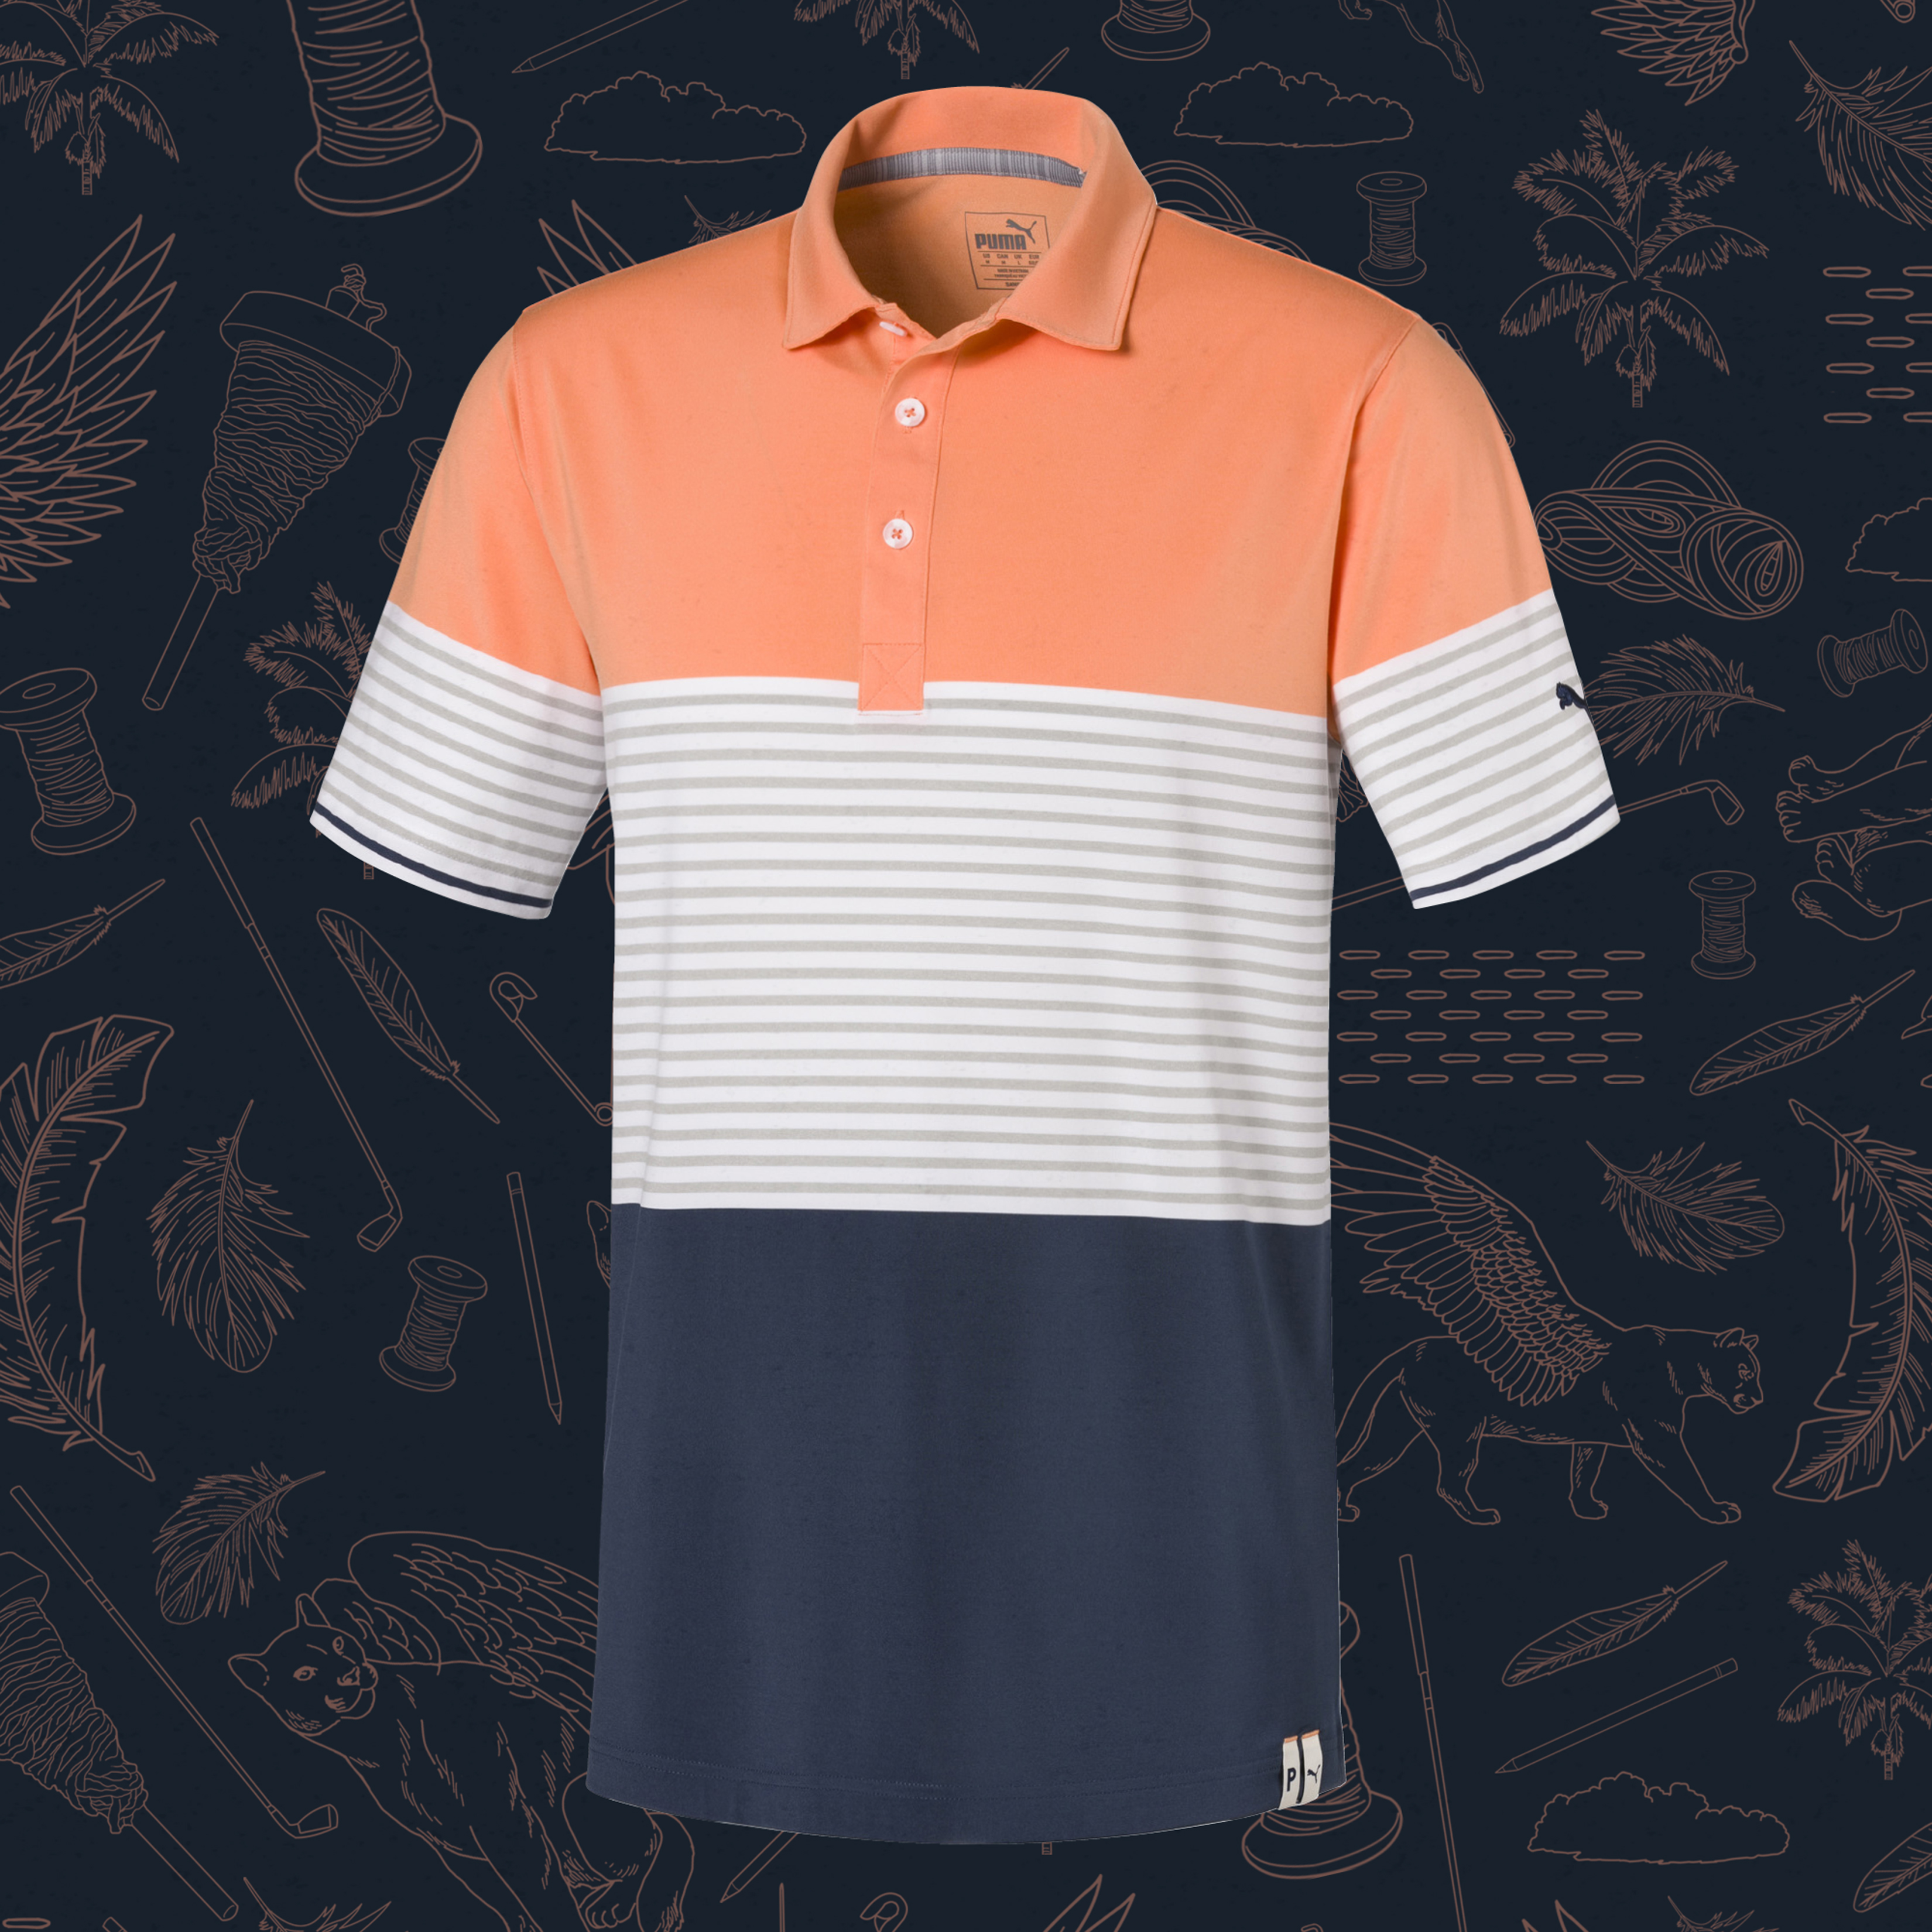 Puma Golf Intros New Super Comfy Cloudspun Collection - The Golf Wire